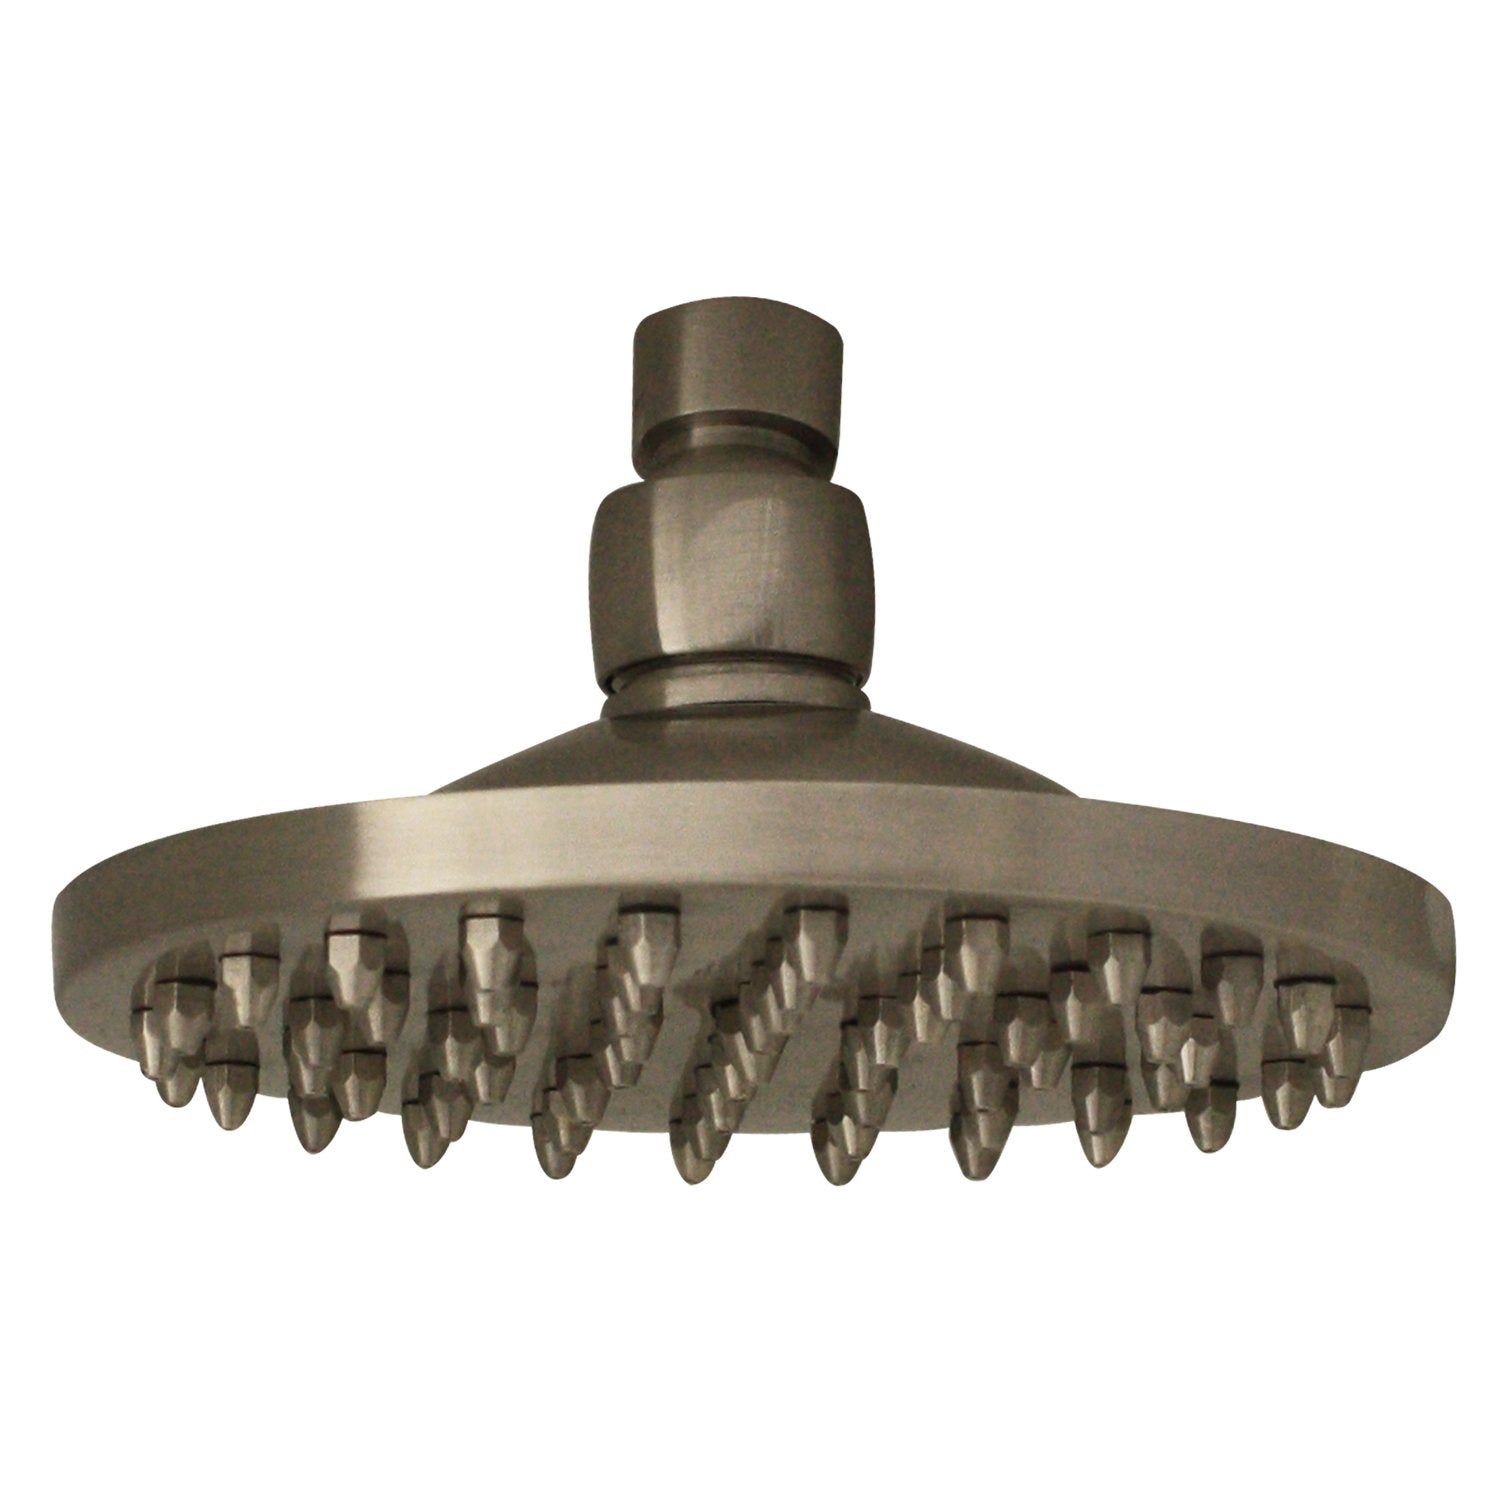 Showerhaus Round Rainfall Showerhead with 62 Spray Nozzles - Solid Brass Construction with Adjustable Ball Joint